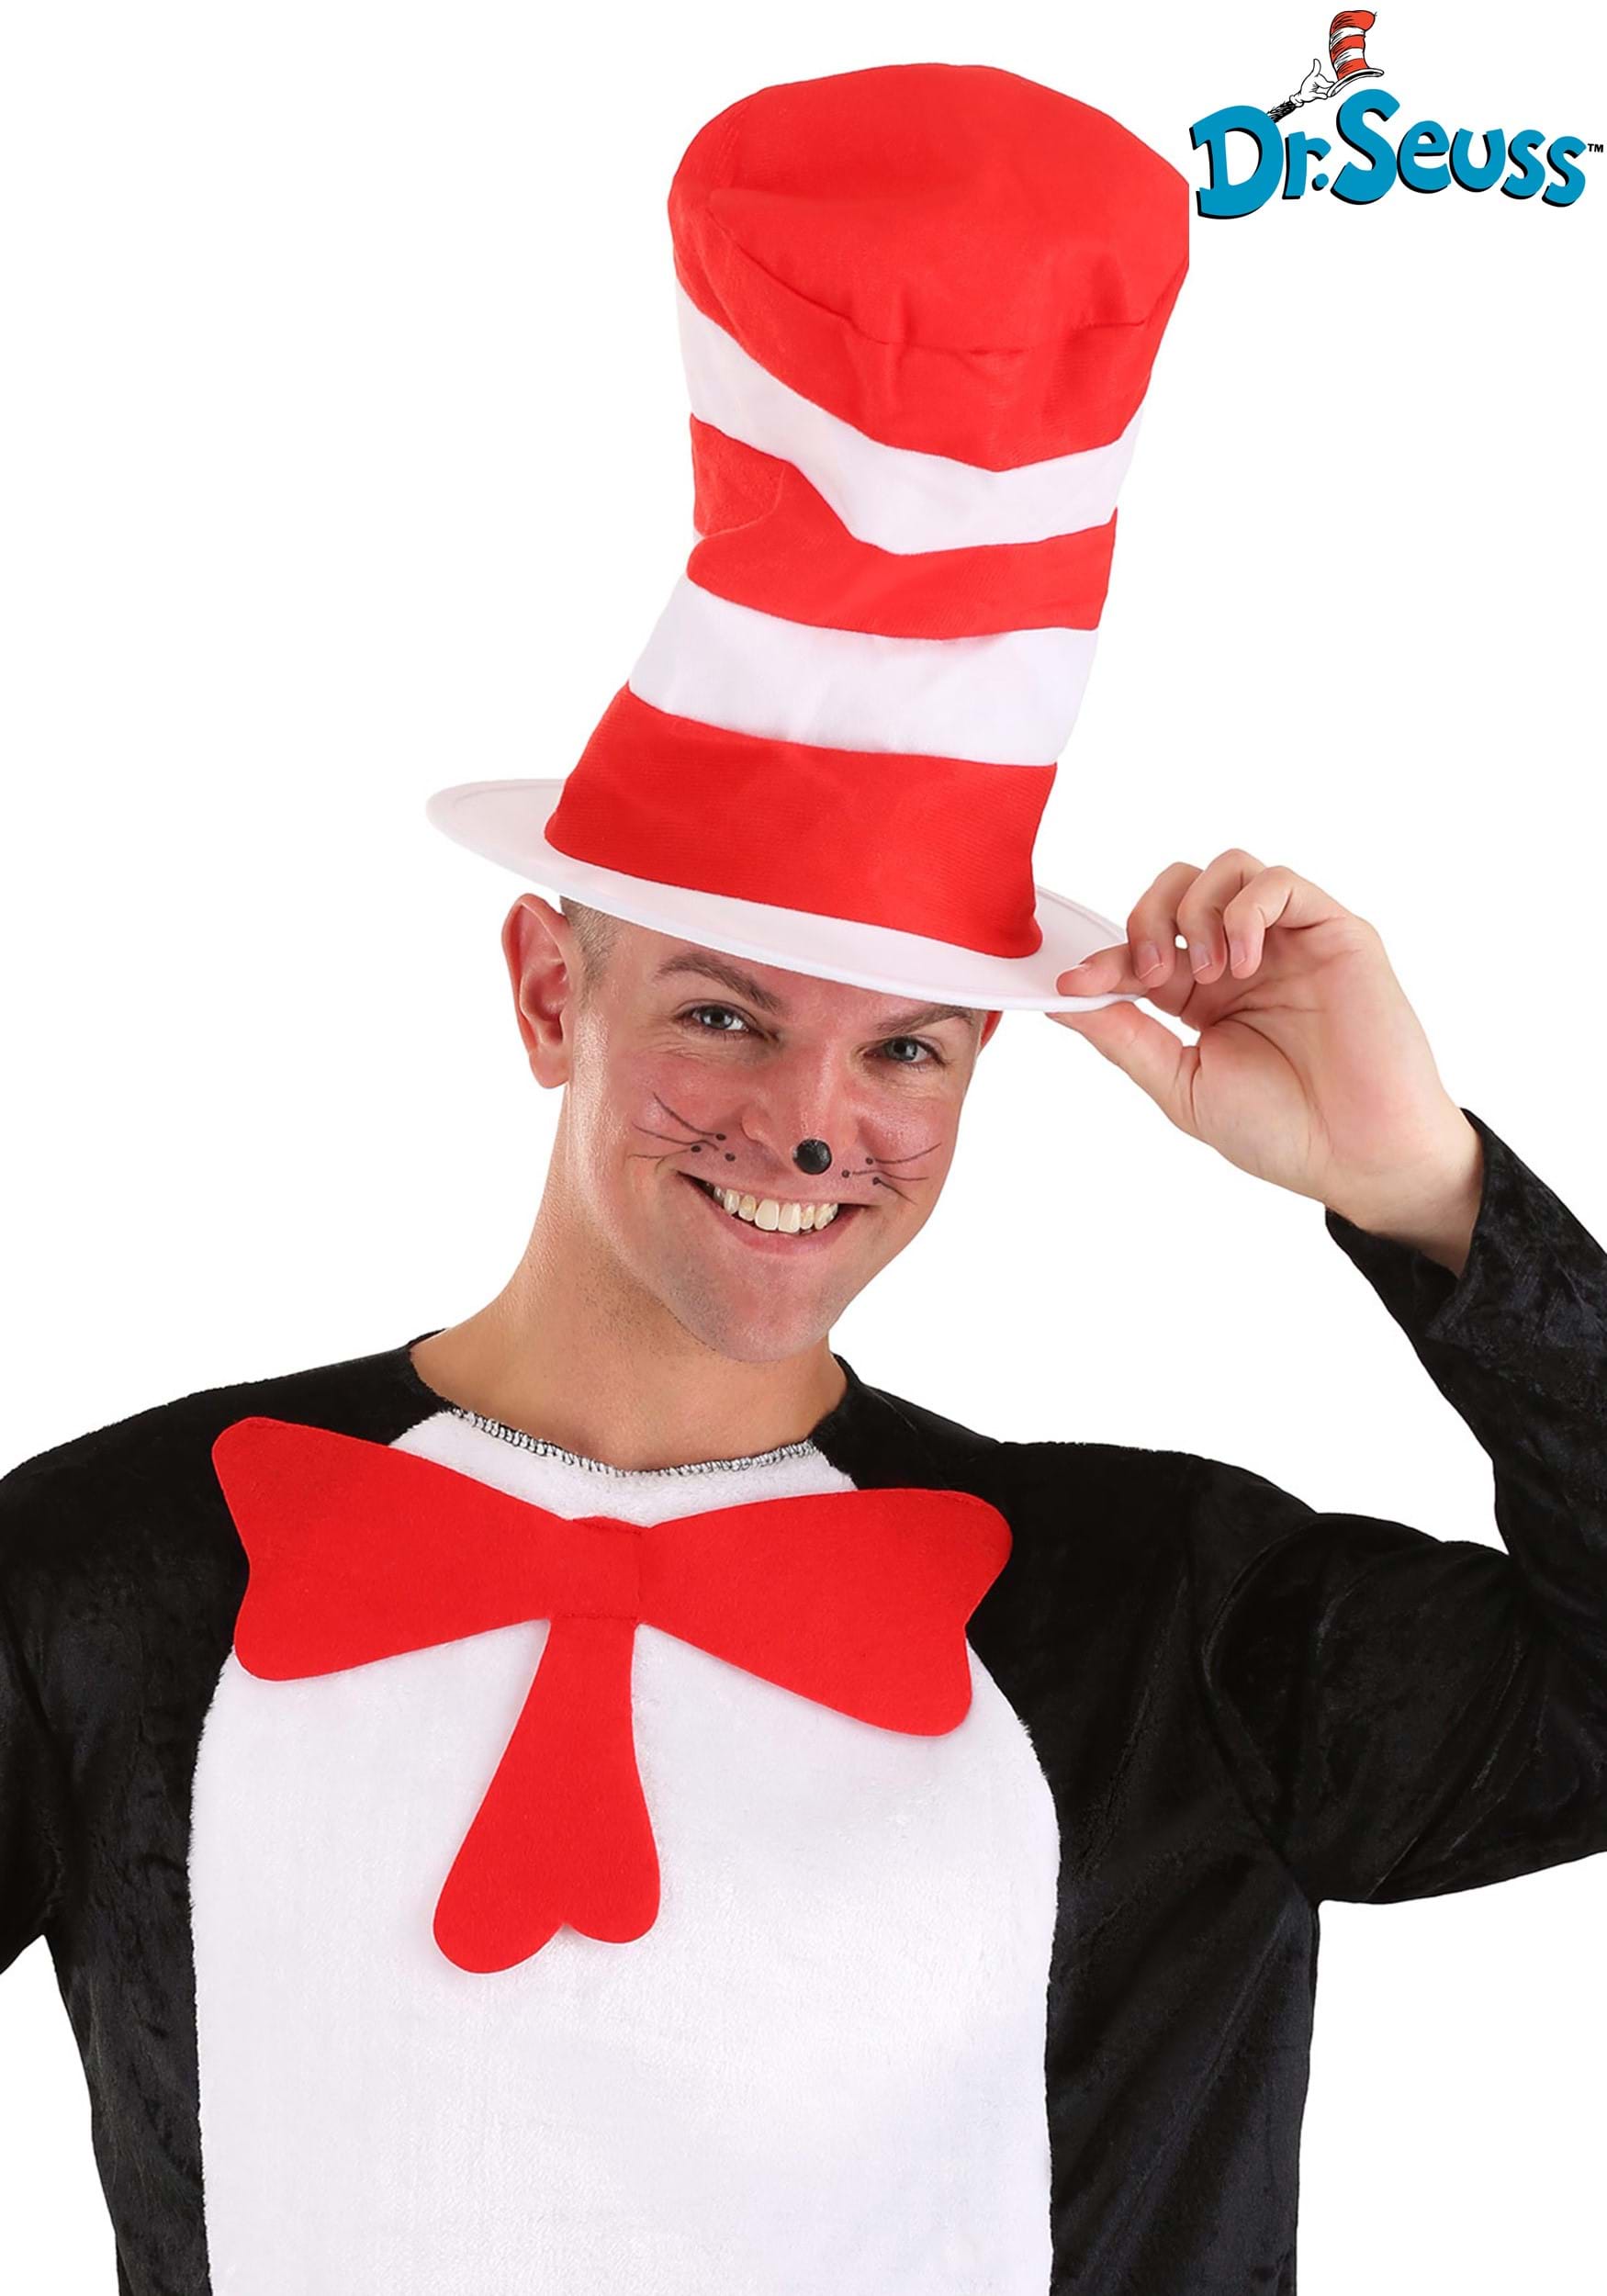 http://images.halloweencostumes.com/products/3415/1-1/cat-in-the-hat-adult-hat.jpg